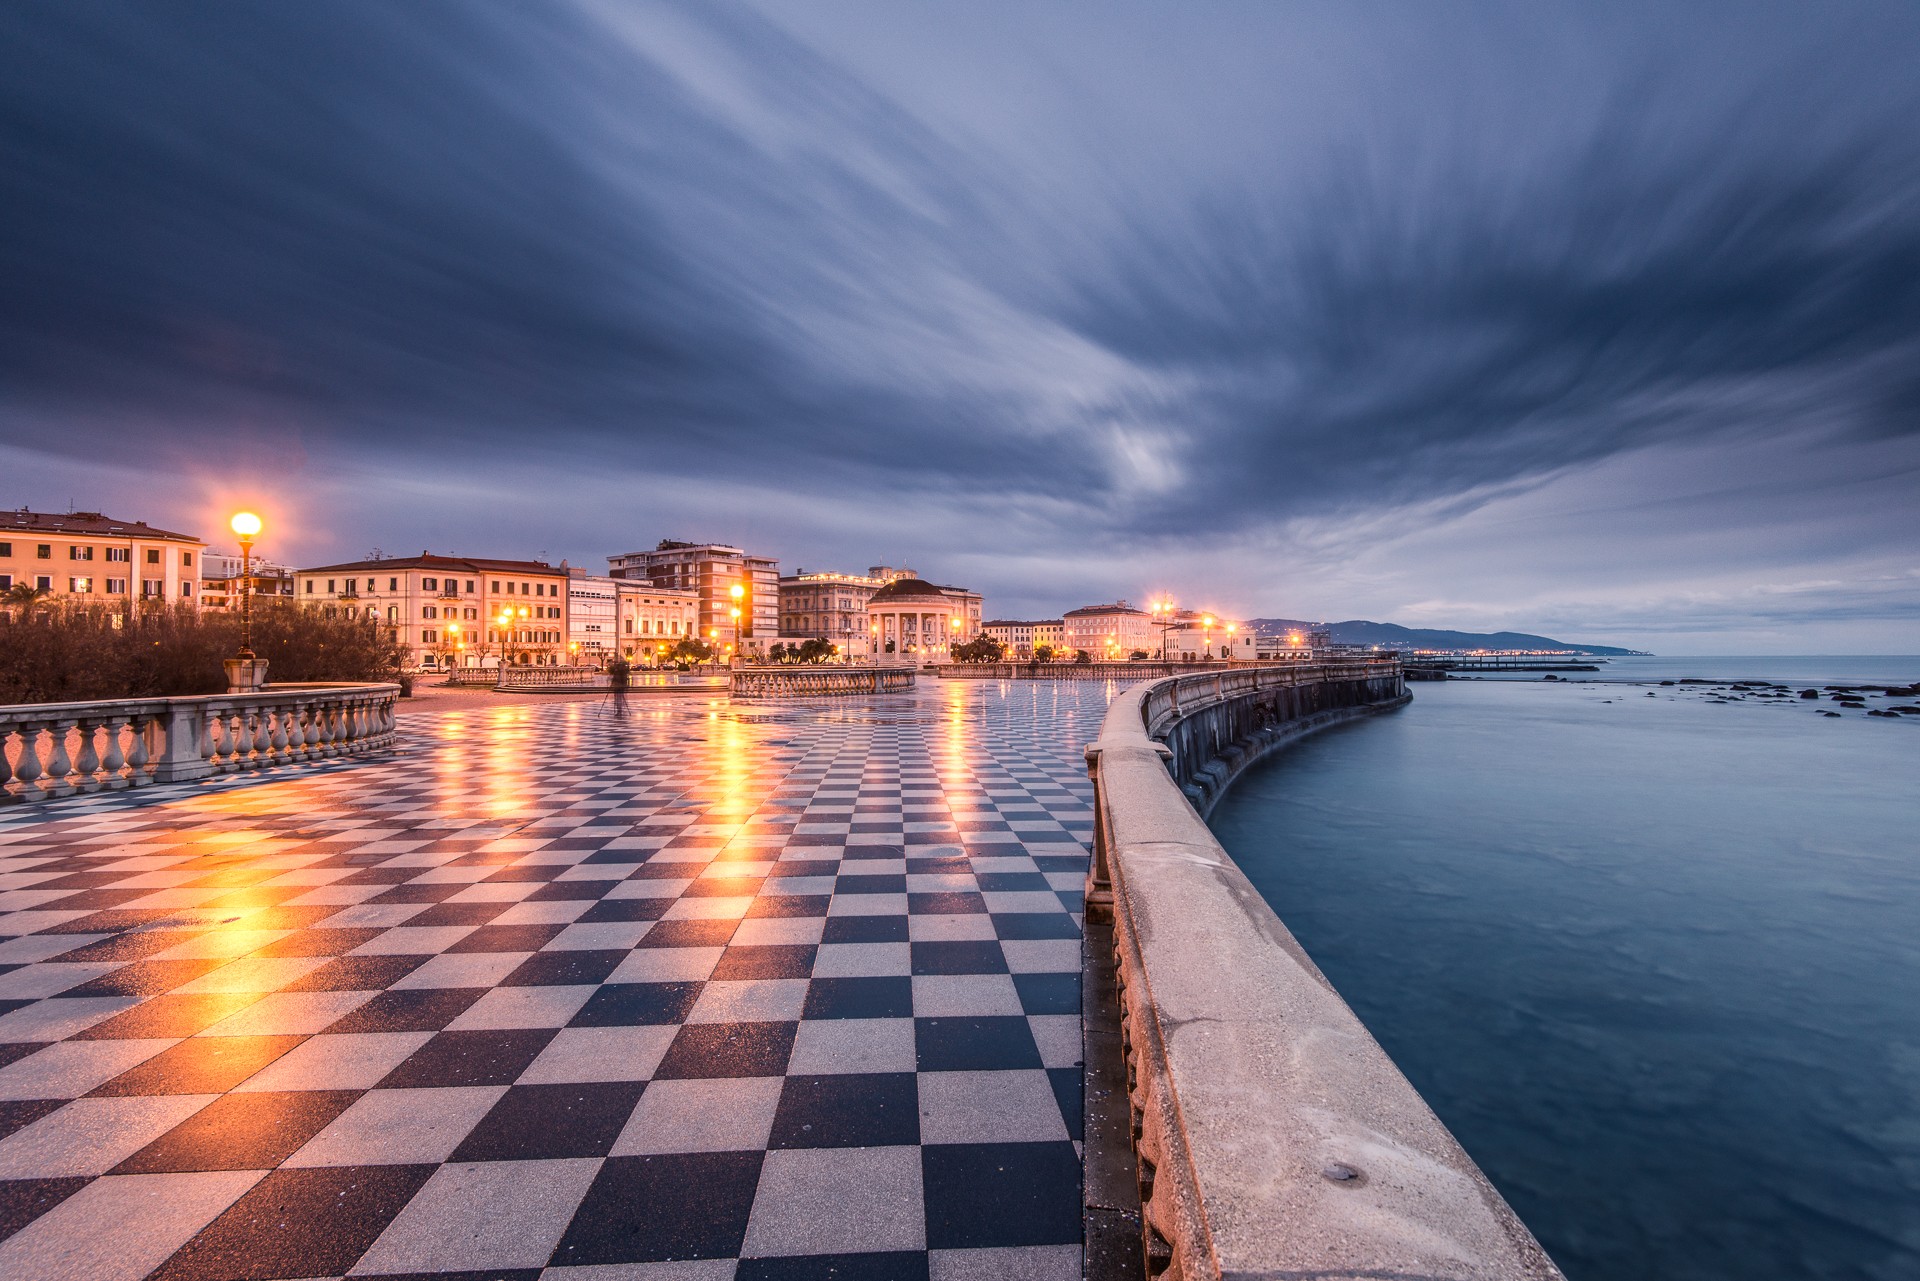 General 1920x1281 cityscape architecture town square Europe Italy terraces checkered old building evening long exposure chess floor